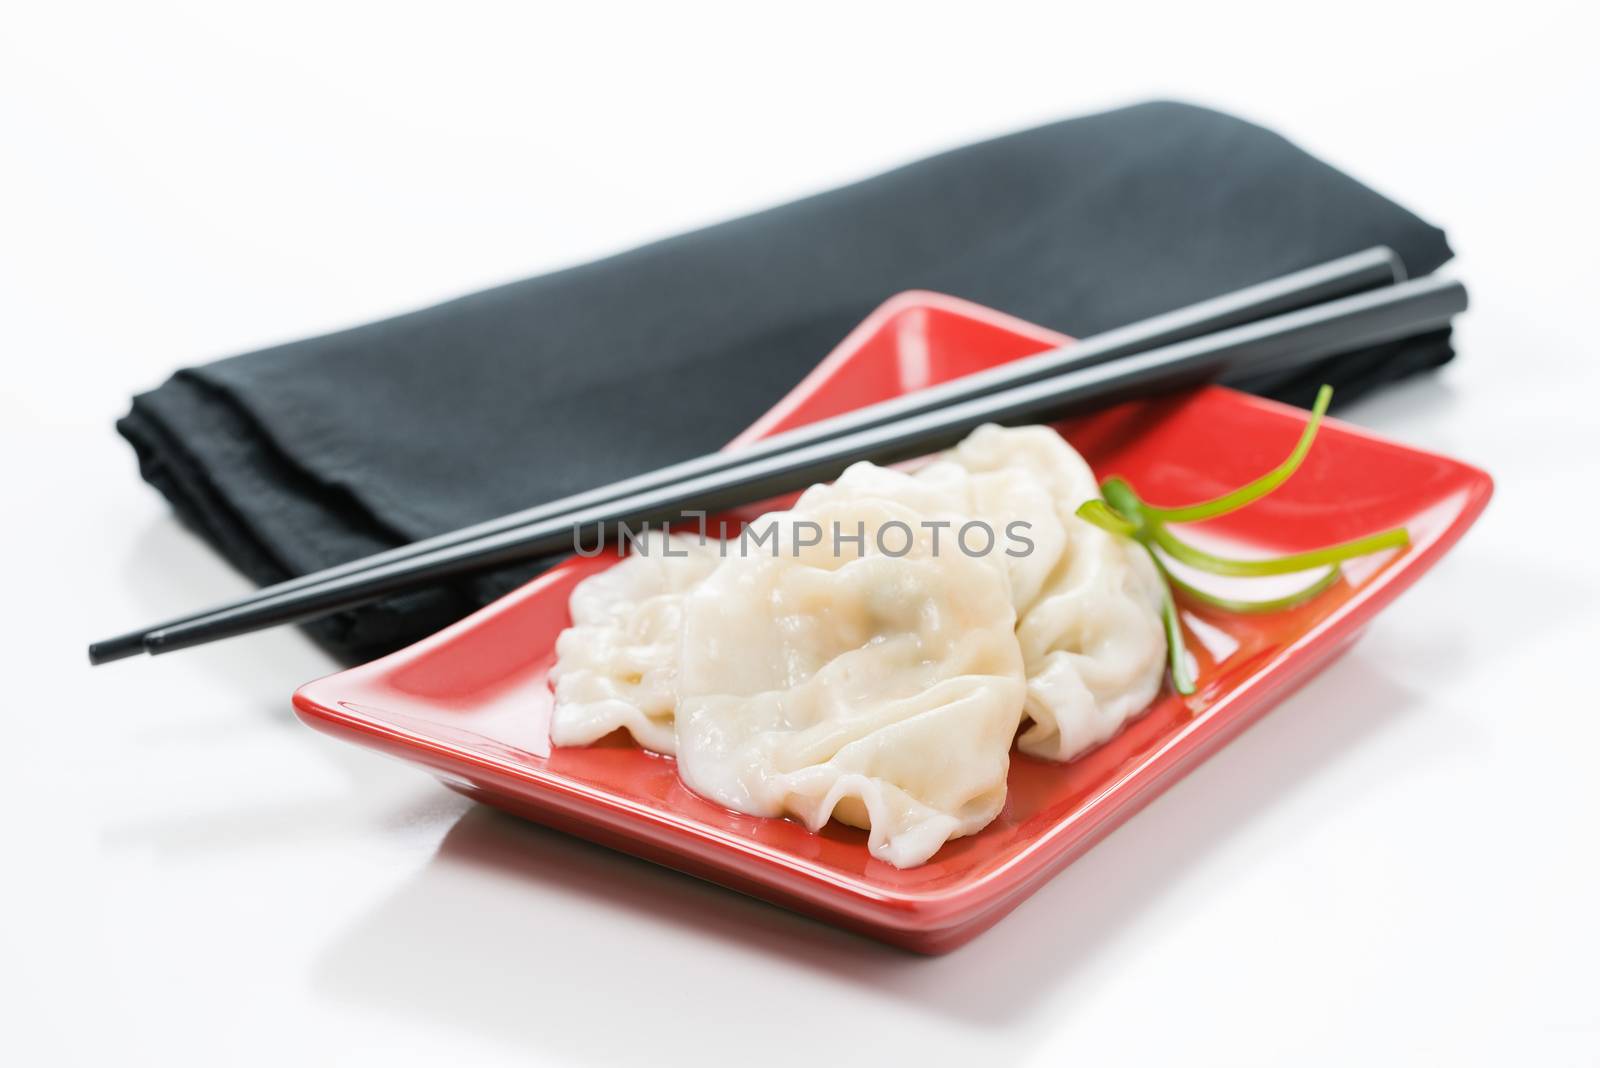 Plate of delicious steamed vegetable chinese dumplings on a red plate.